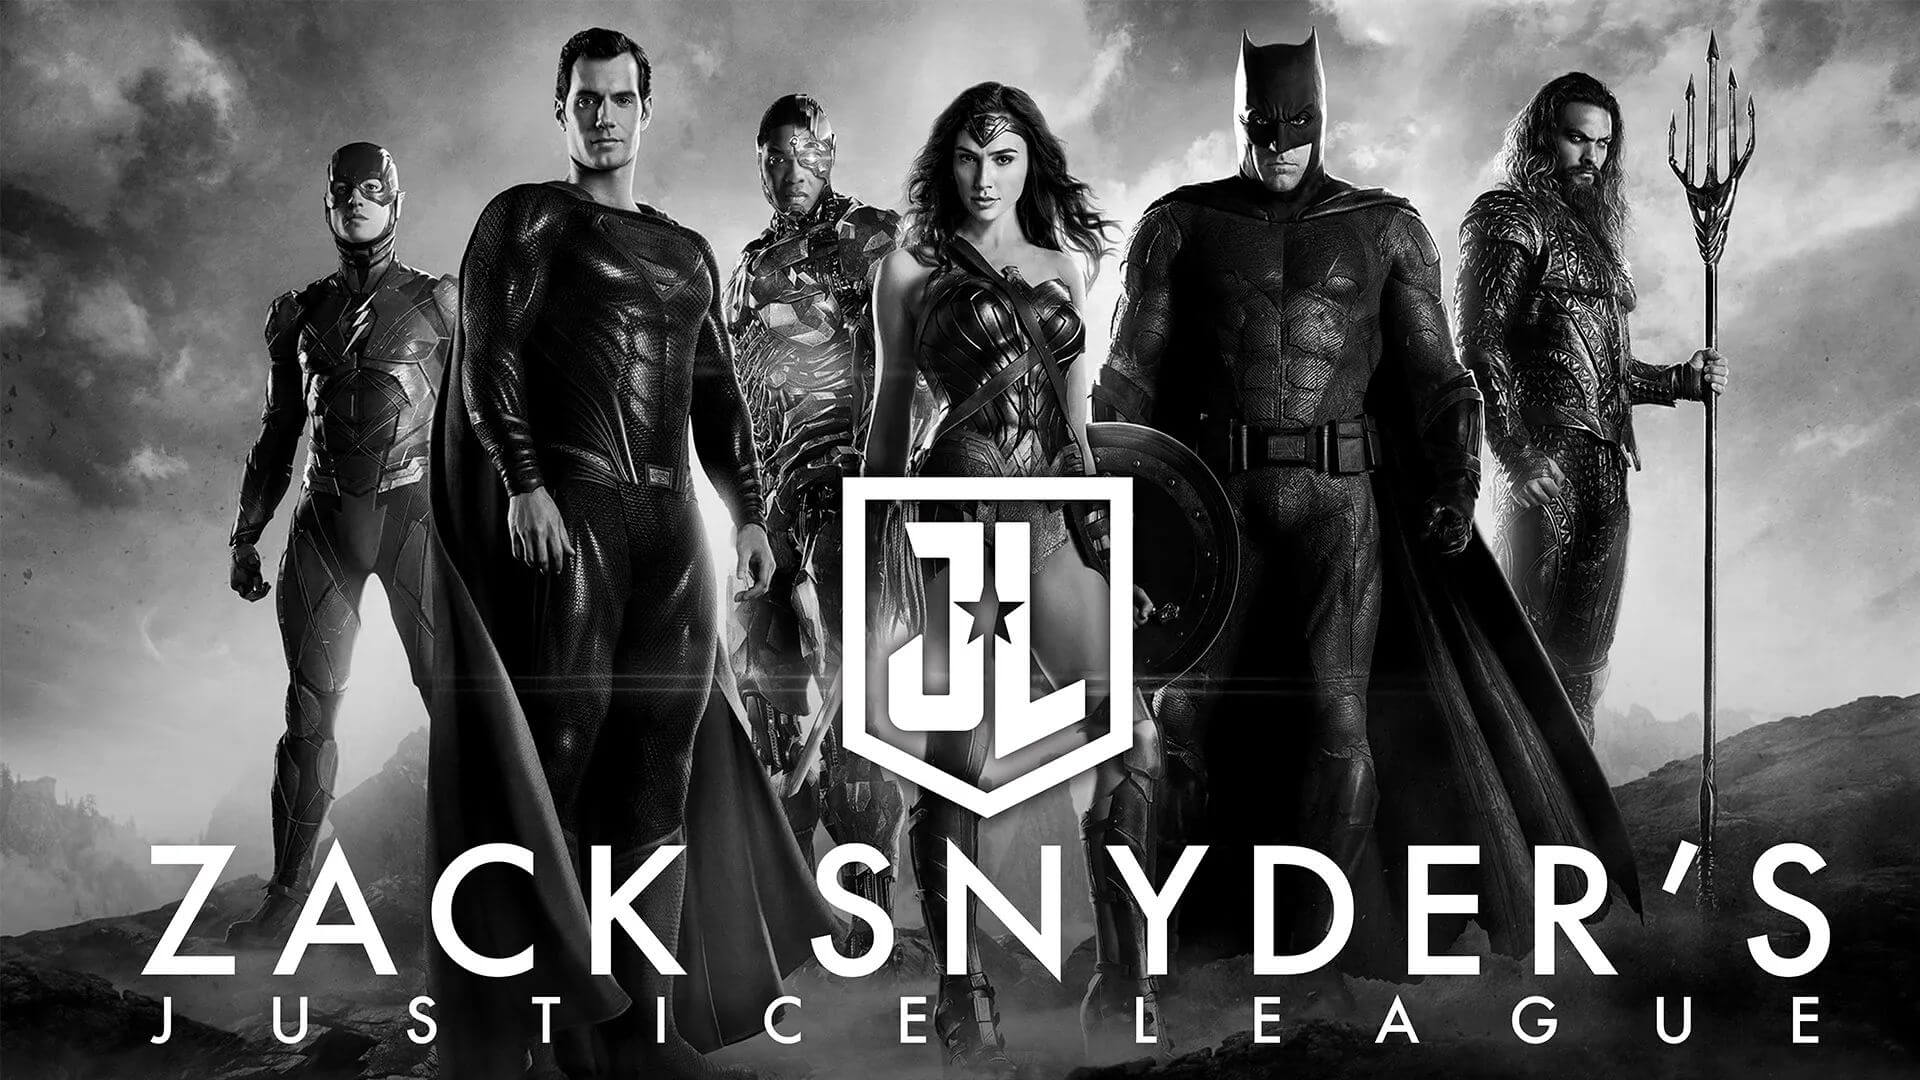 32-facts-about-the-movie-zack-snyders-justice-league